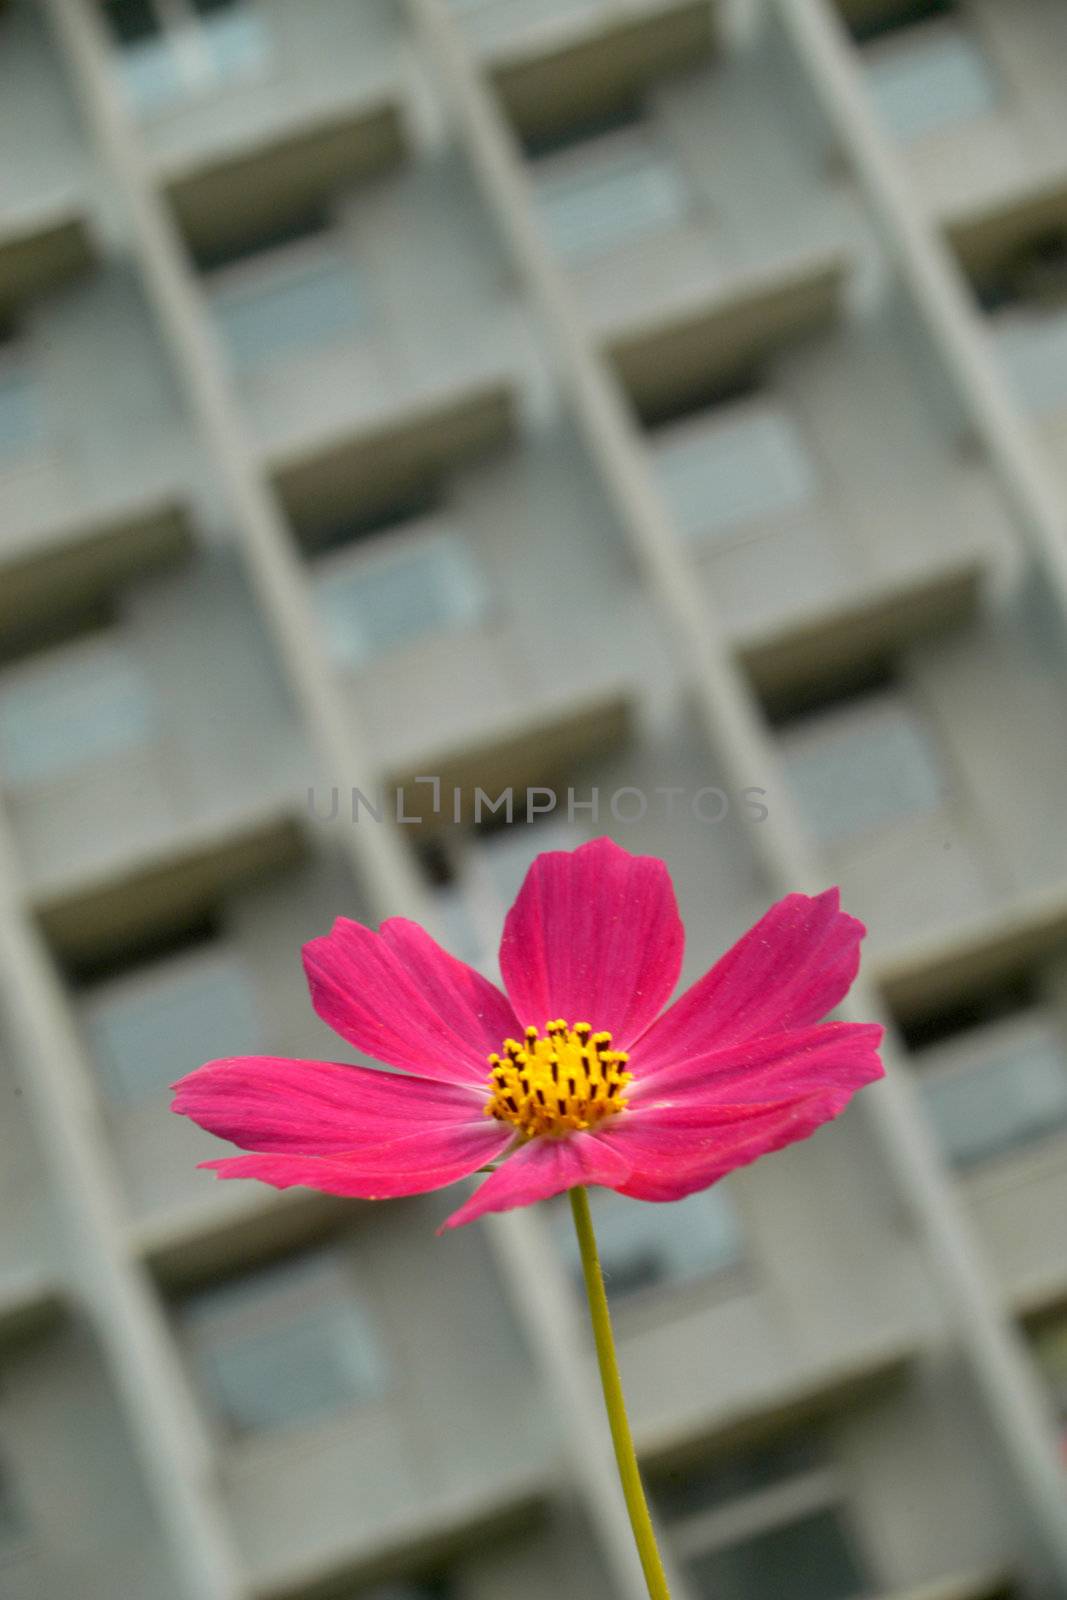 Flower and building by velkol